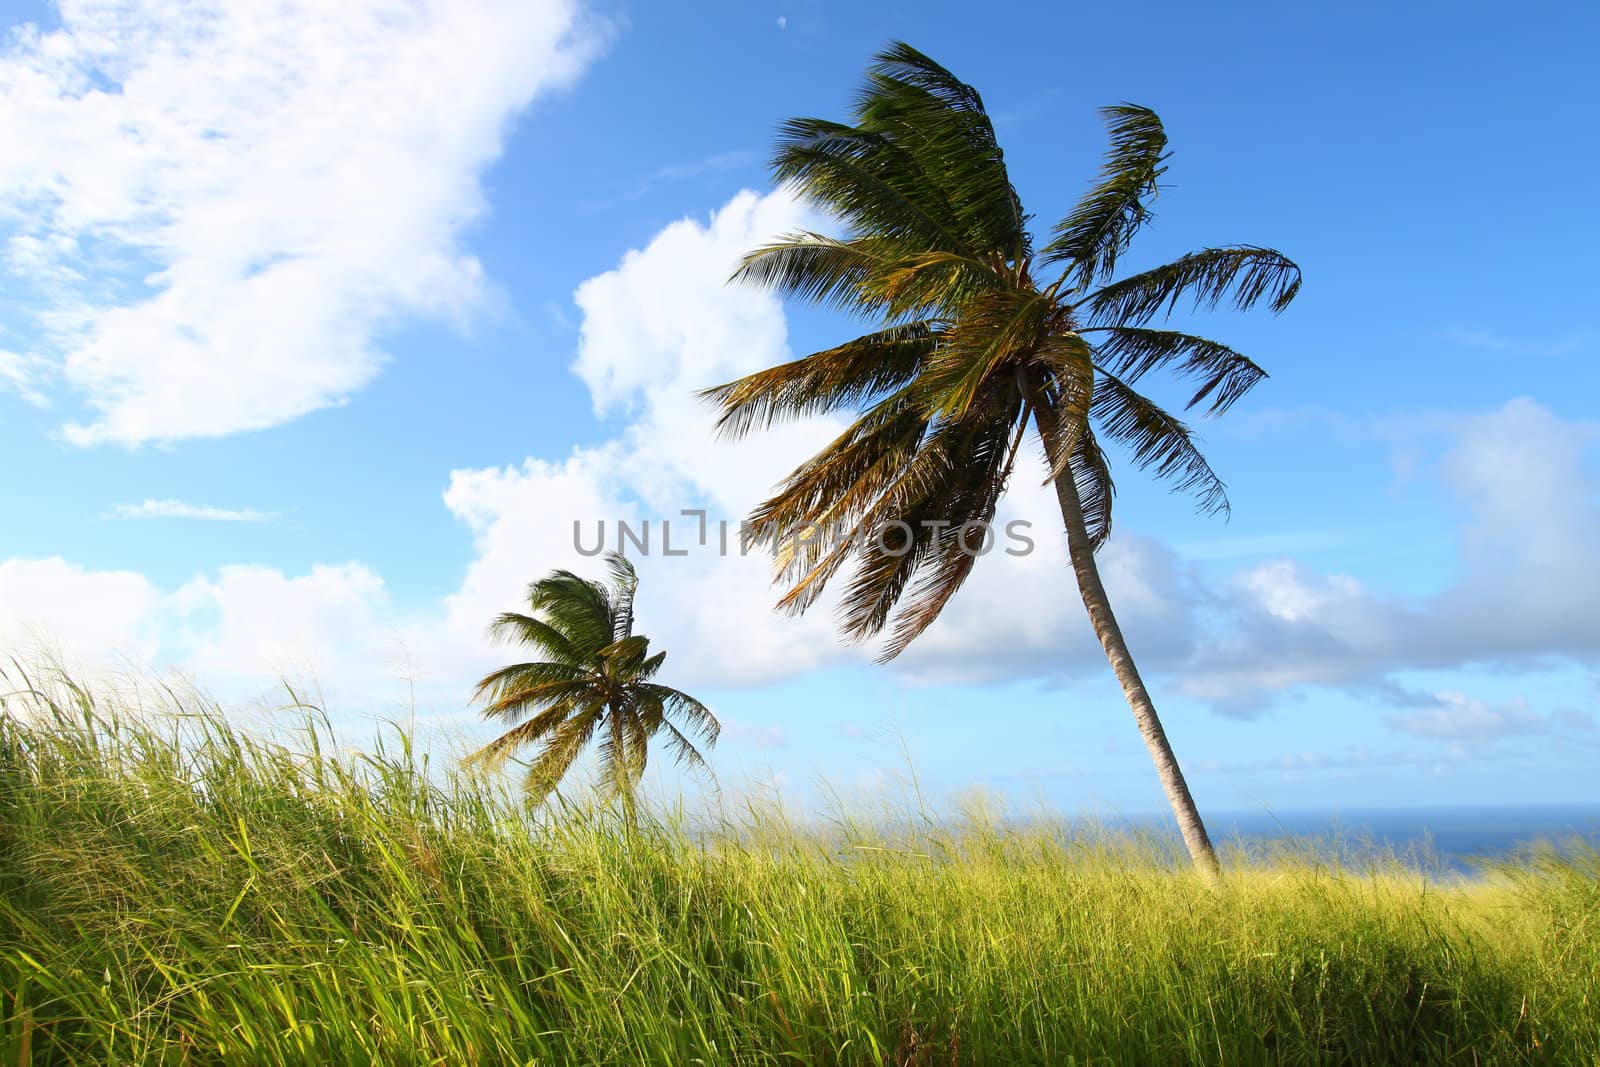 Palm trees sway in the wind on the Caribbean island Saint Kitts.